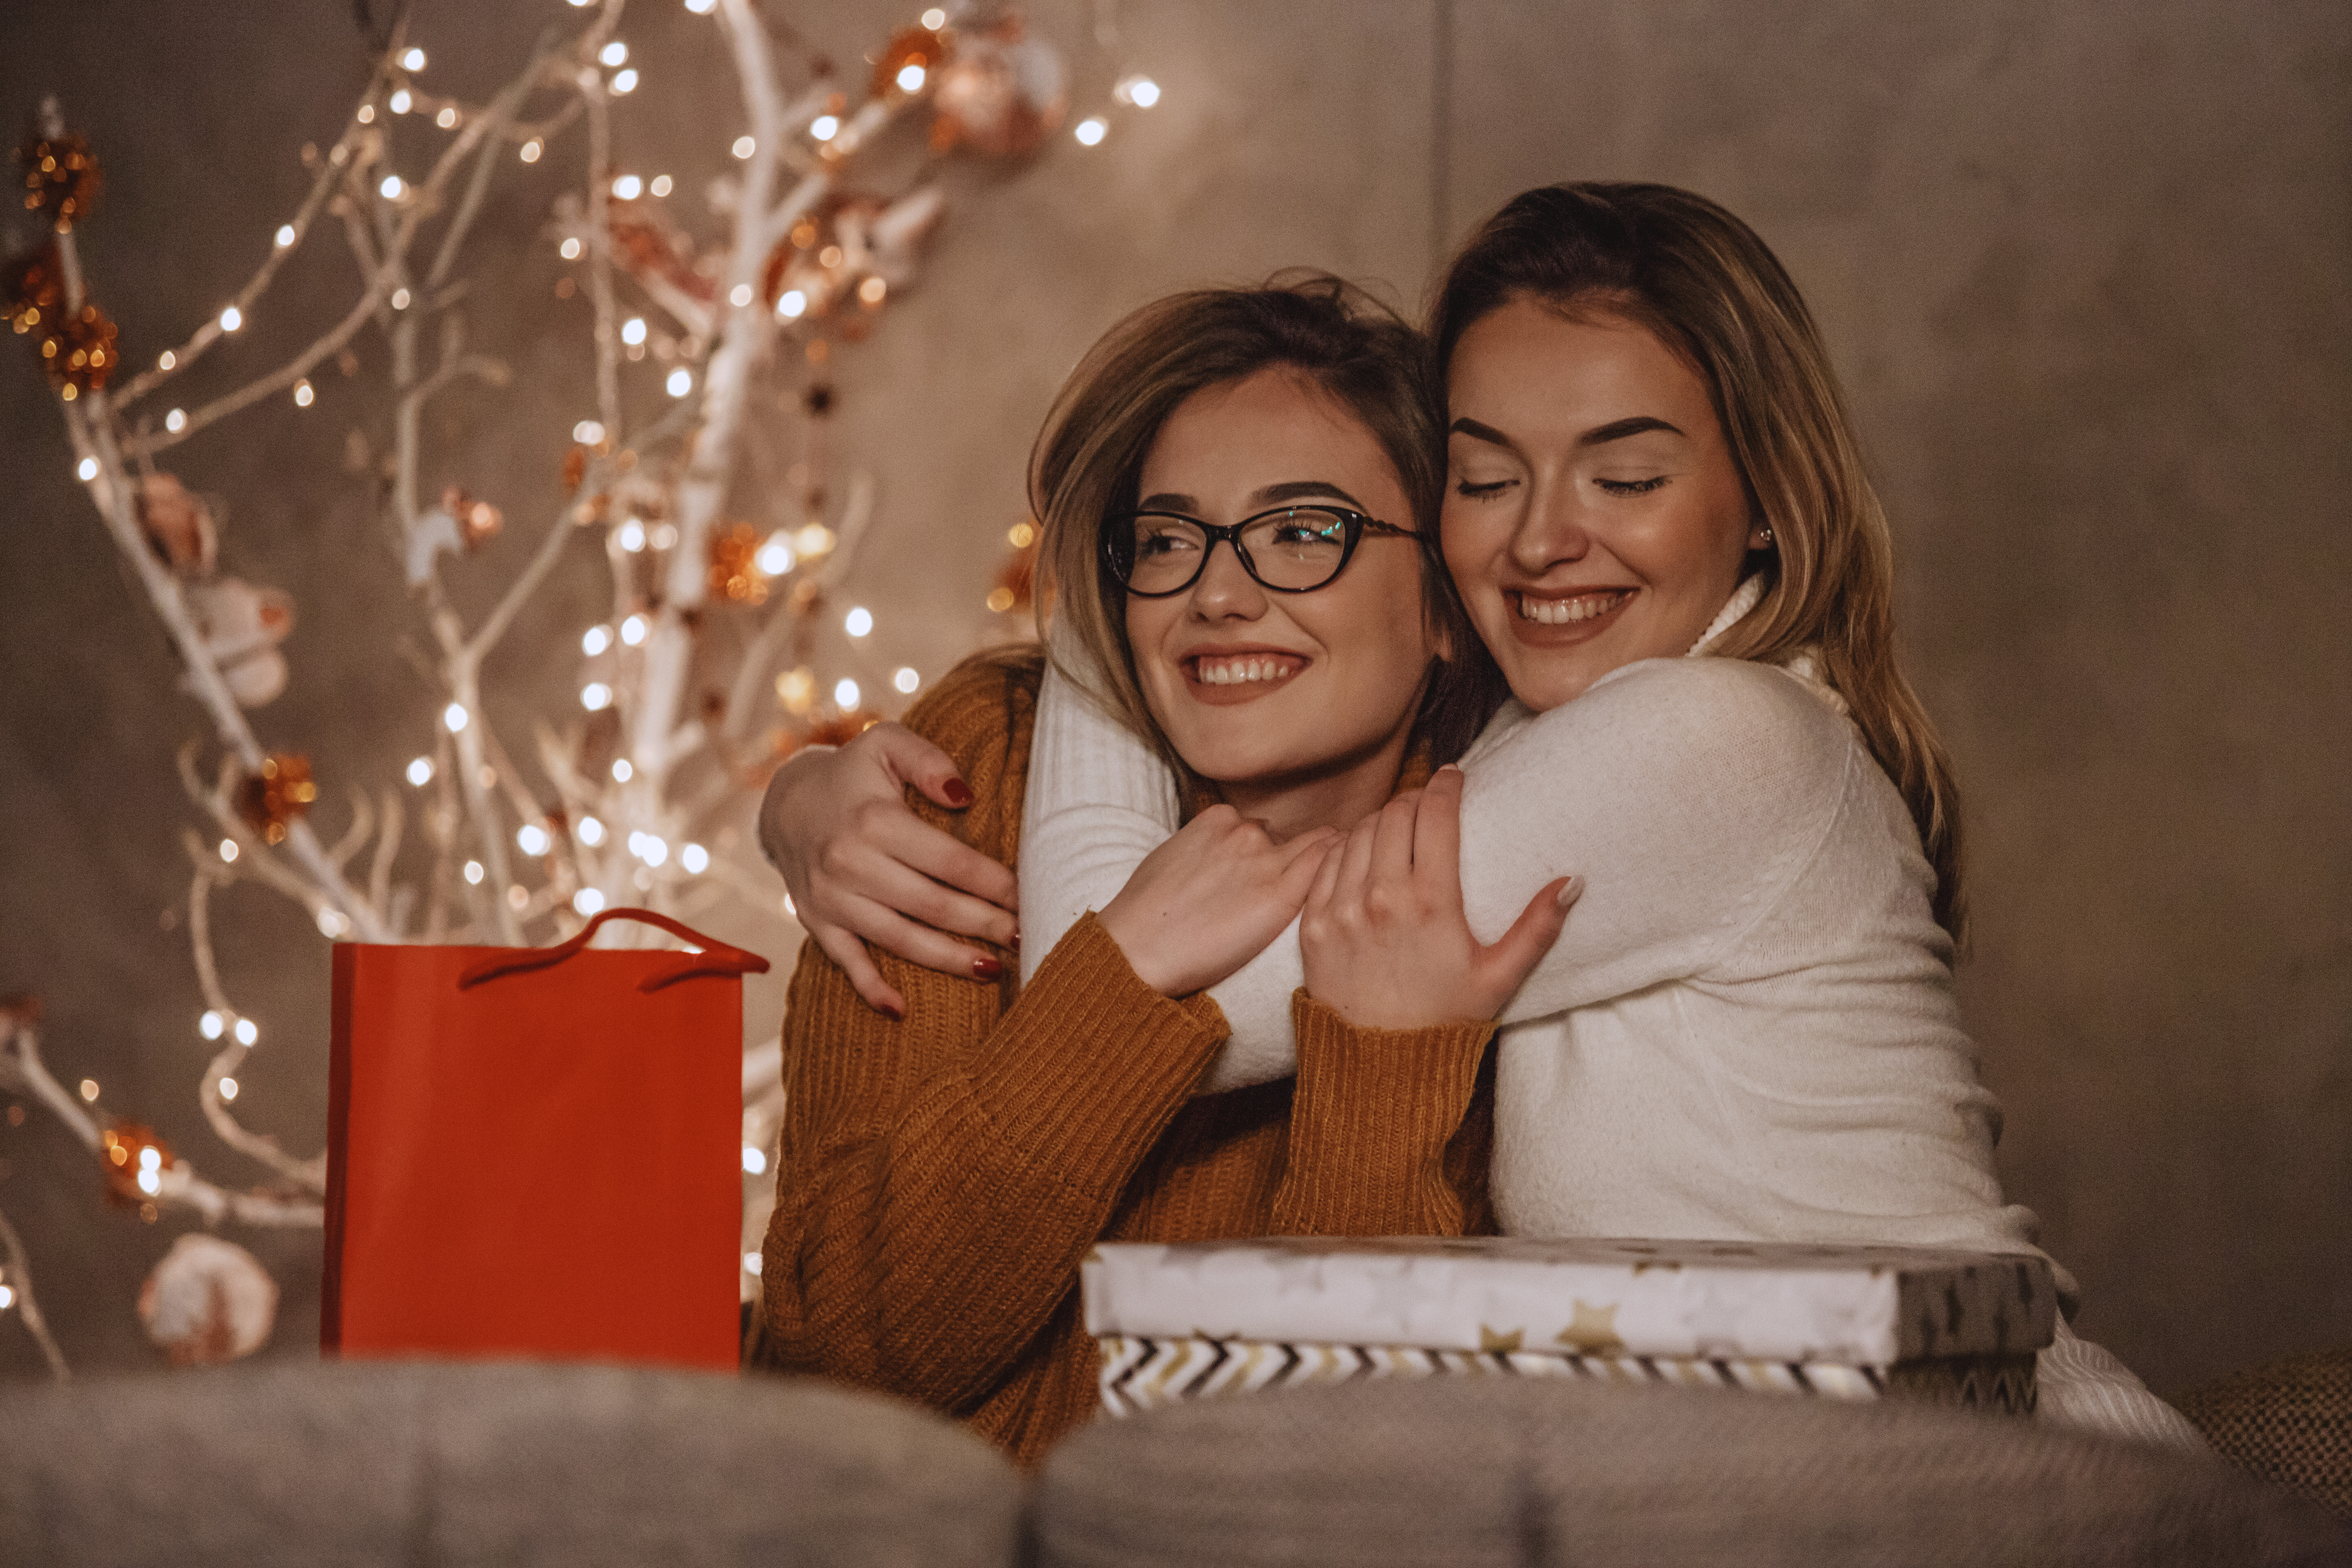 Two sisters celebrating Christmas together | Source: Getty Images